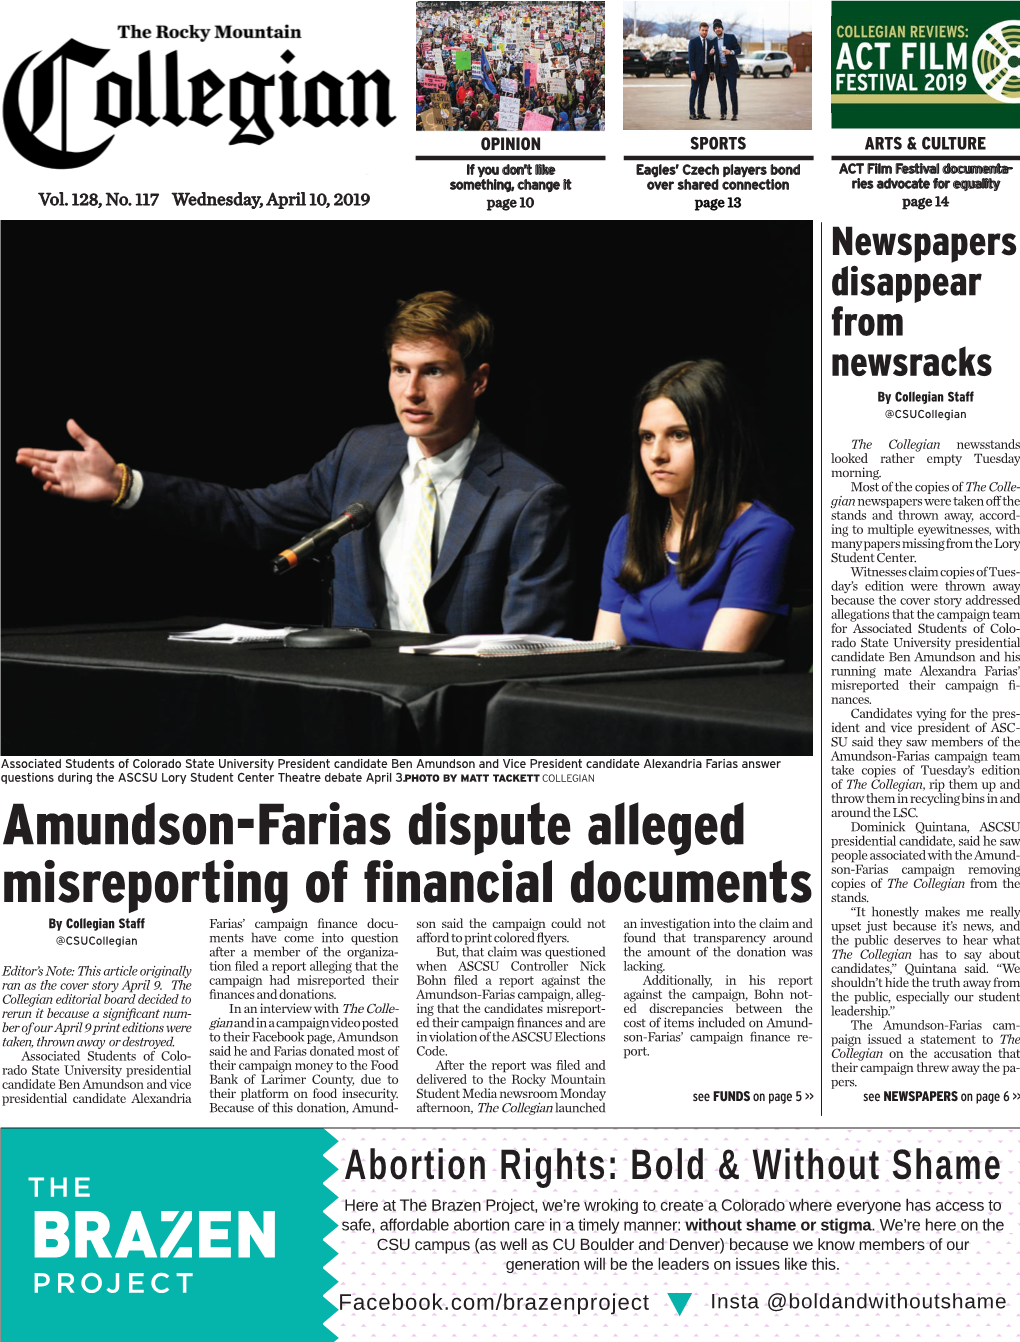 Amundson-Farias Dispute Alleged Misreporting of Financial Documents